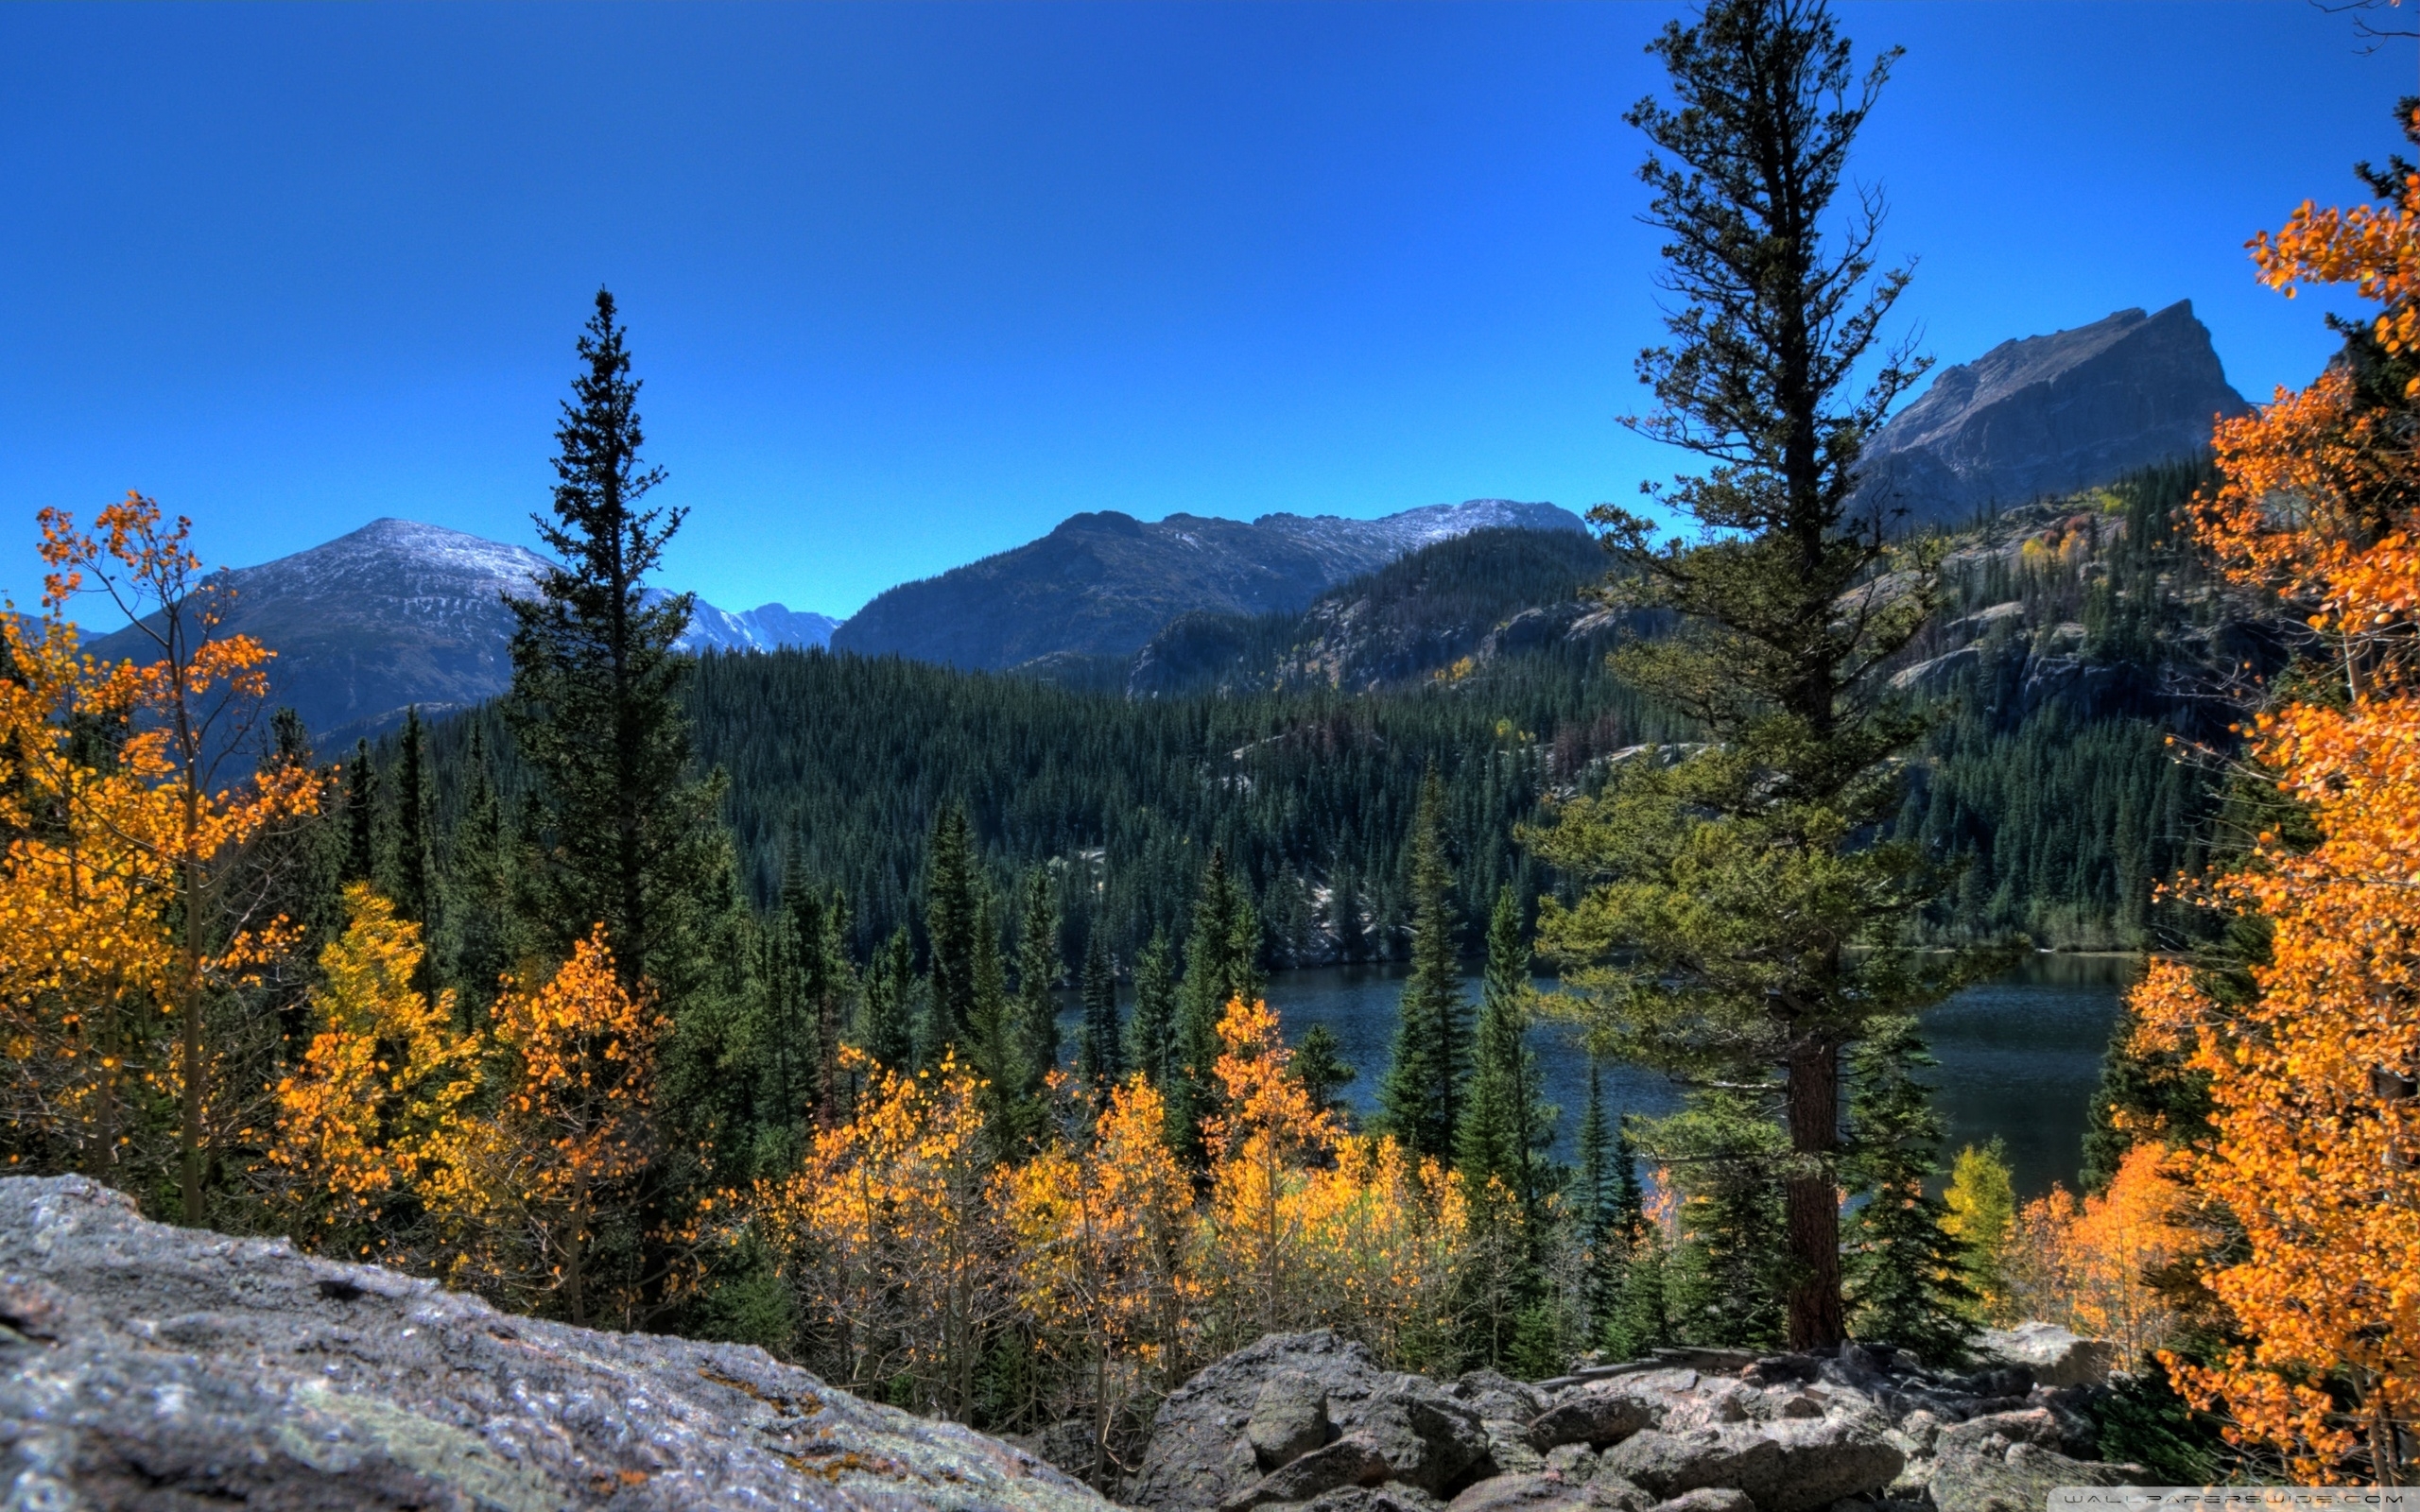 10 New Rocky Mountain National Park Wallpaper Full Hd 1920×1080 For Pc